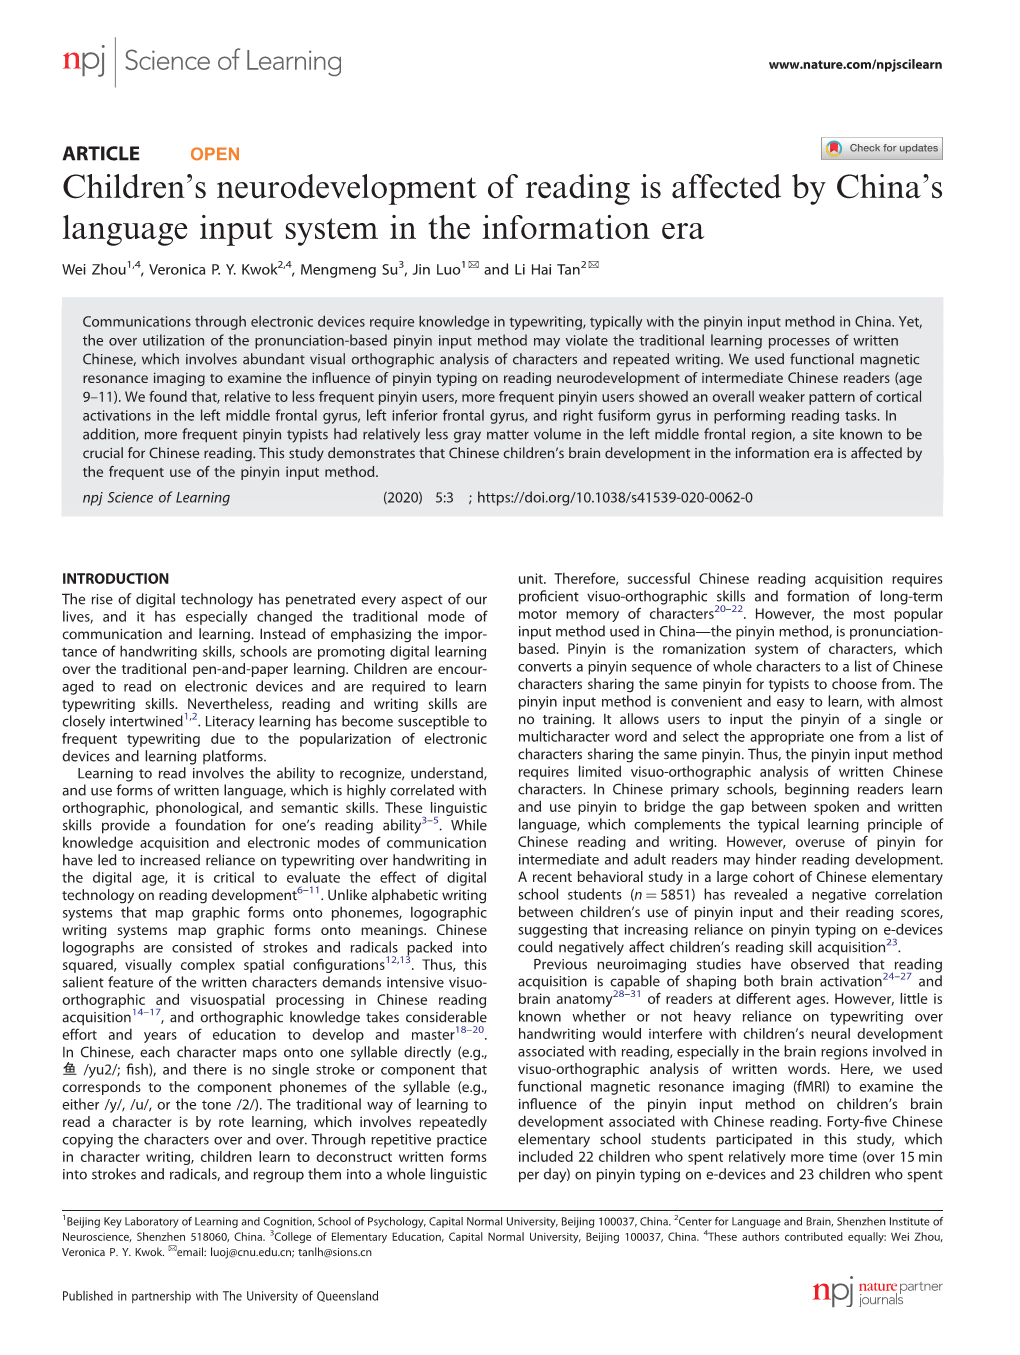 Children's Neurodevelopment of Reading Is Affected by China's